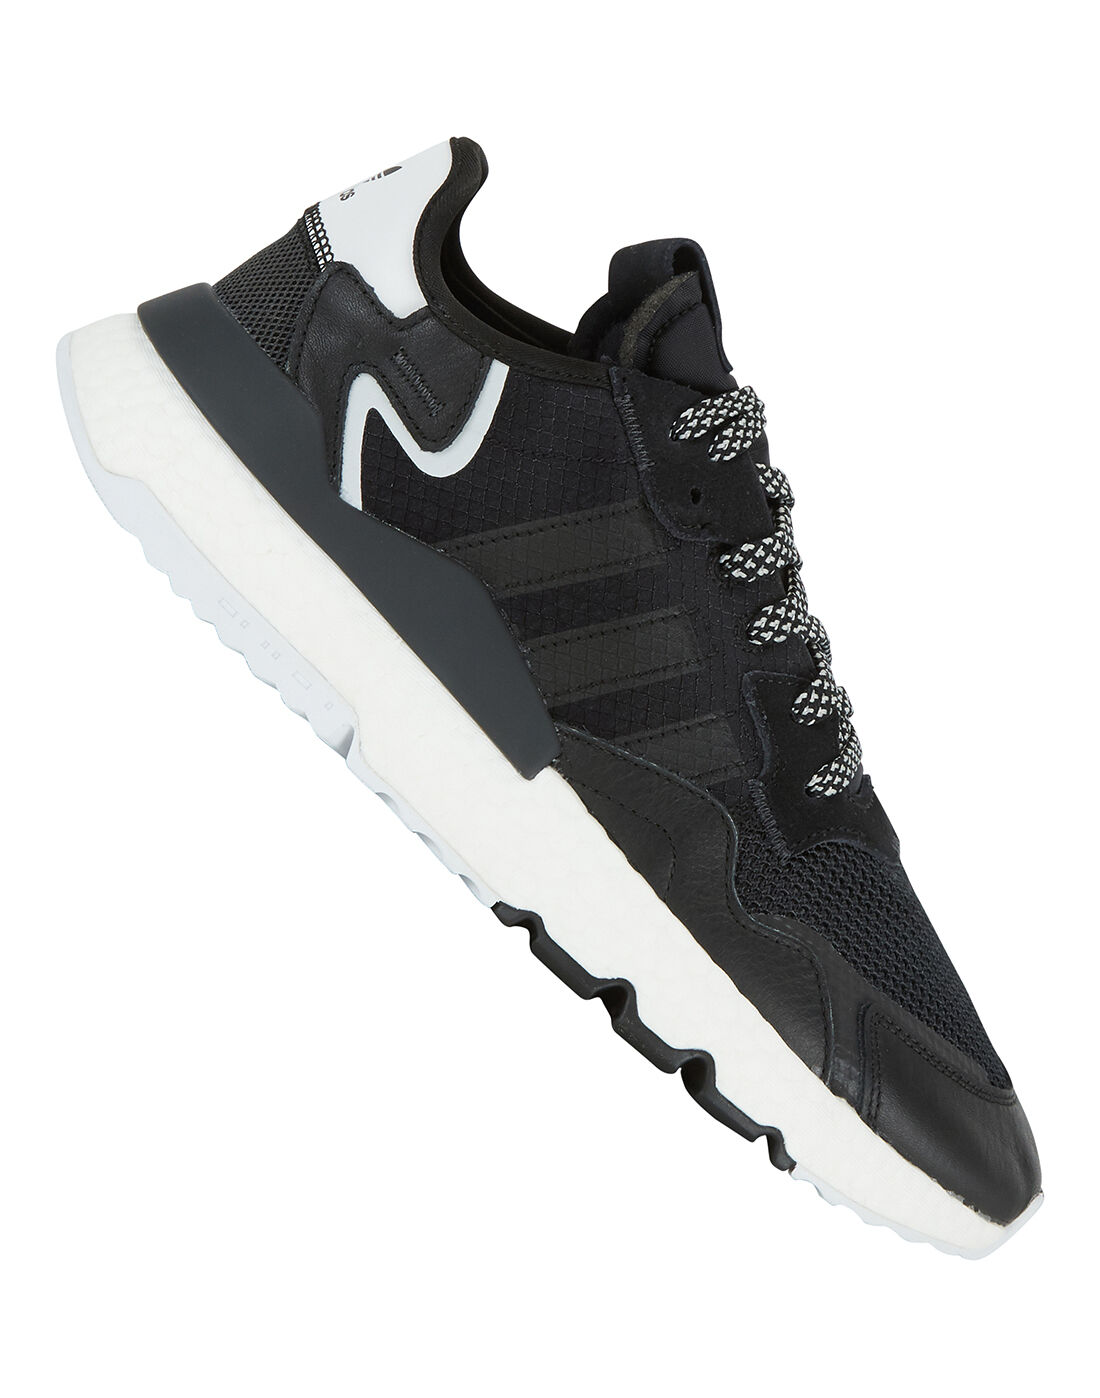 adidas jogger mens trainers